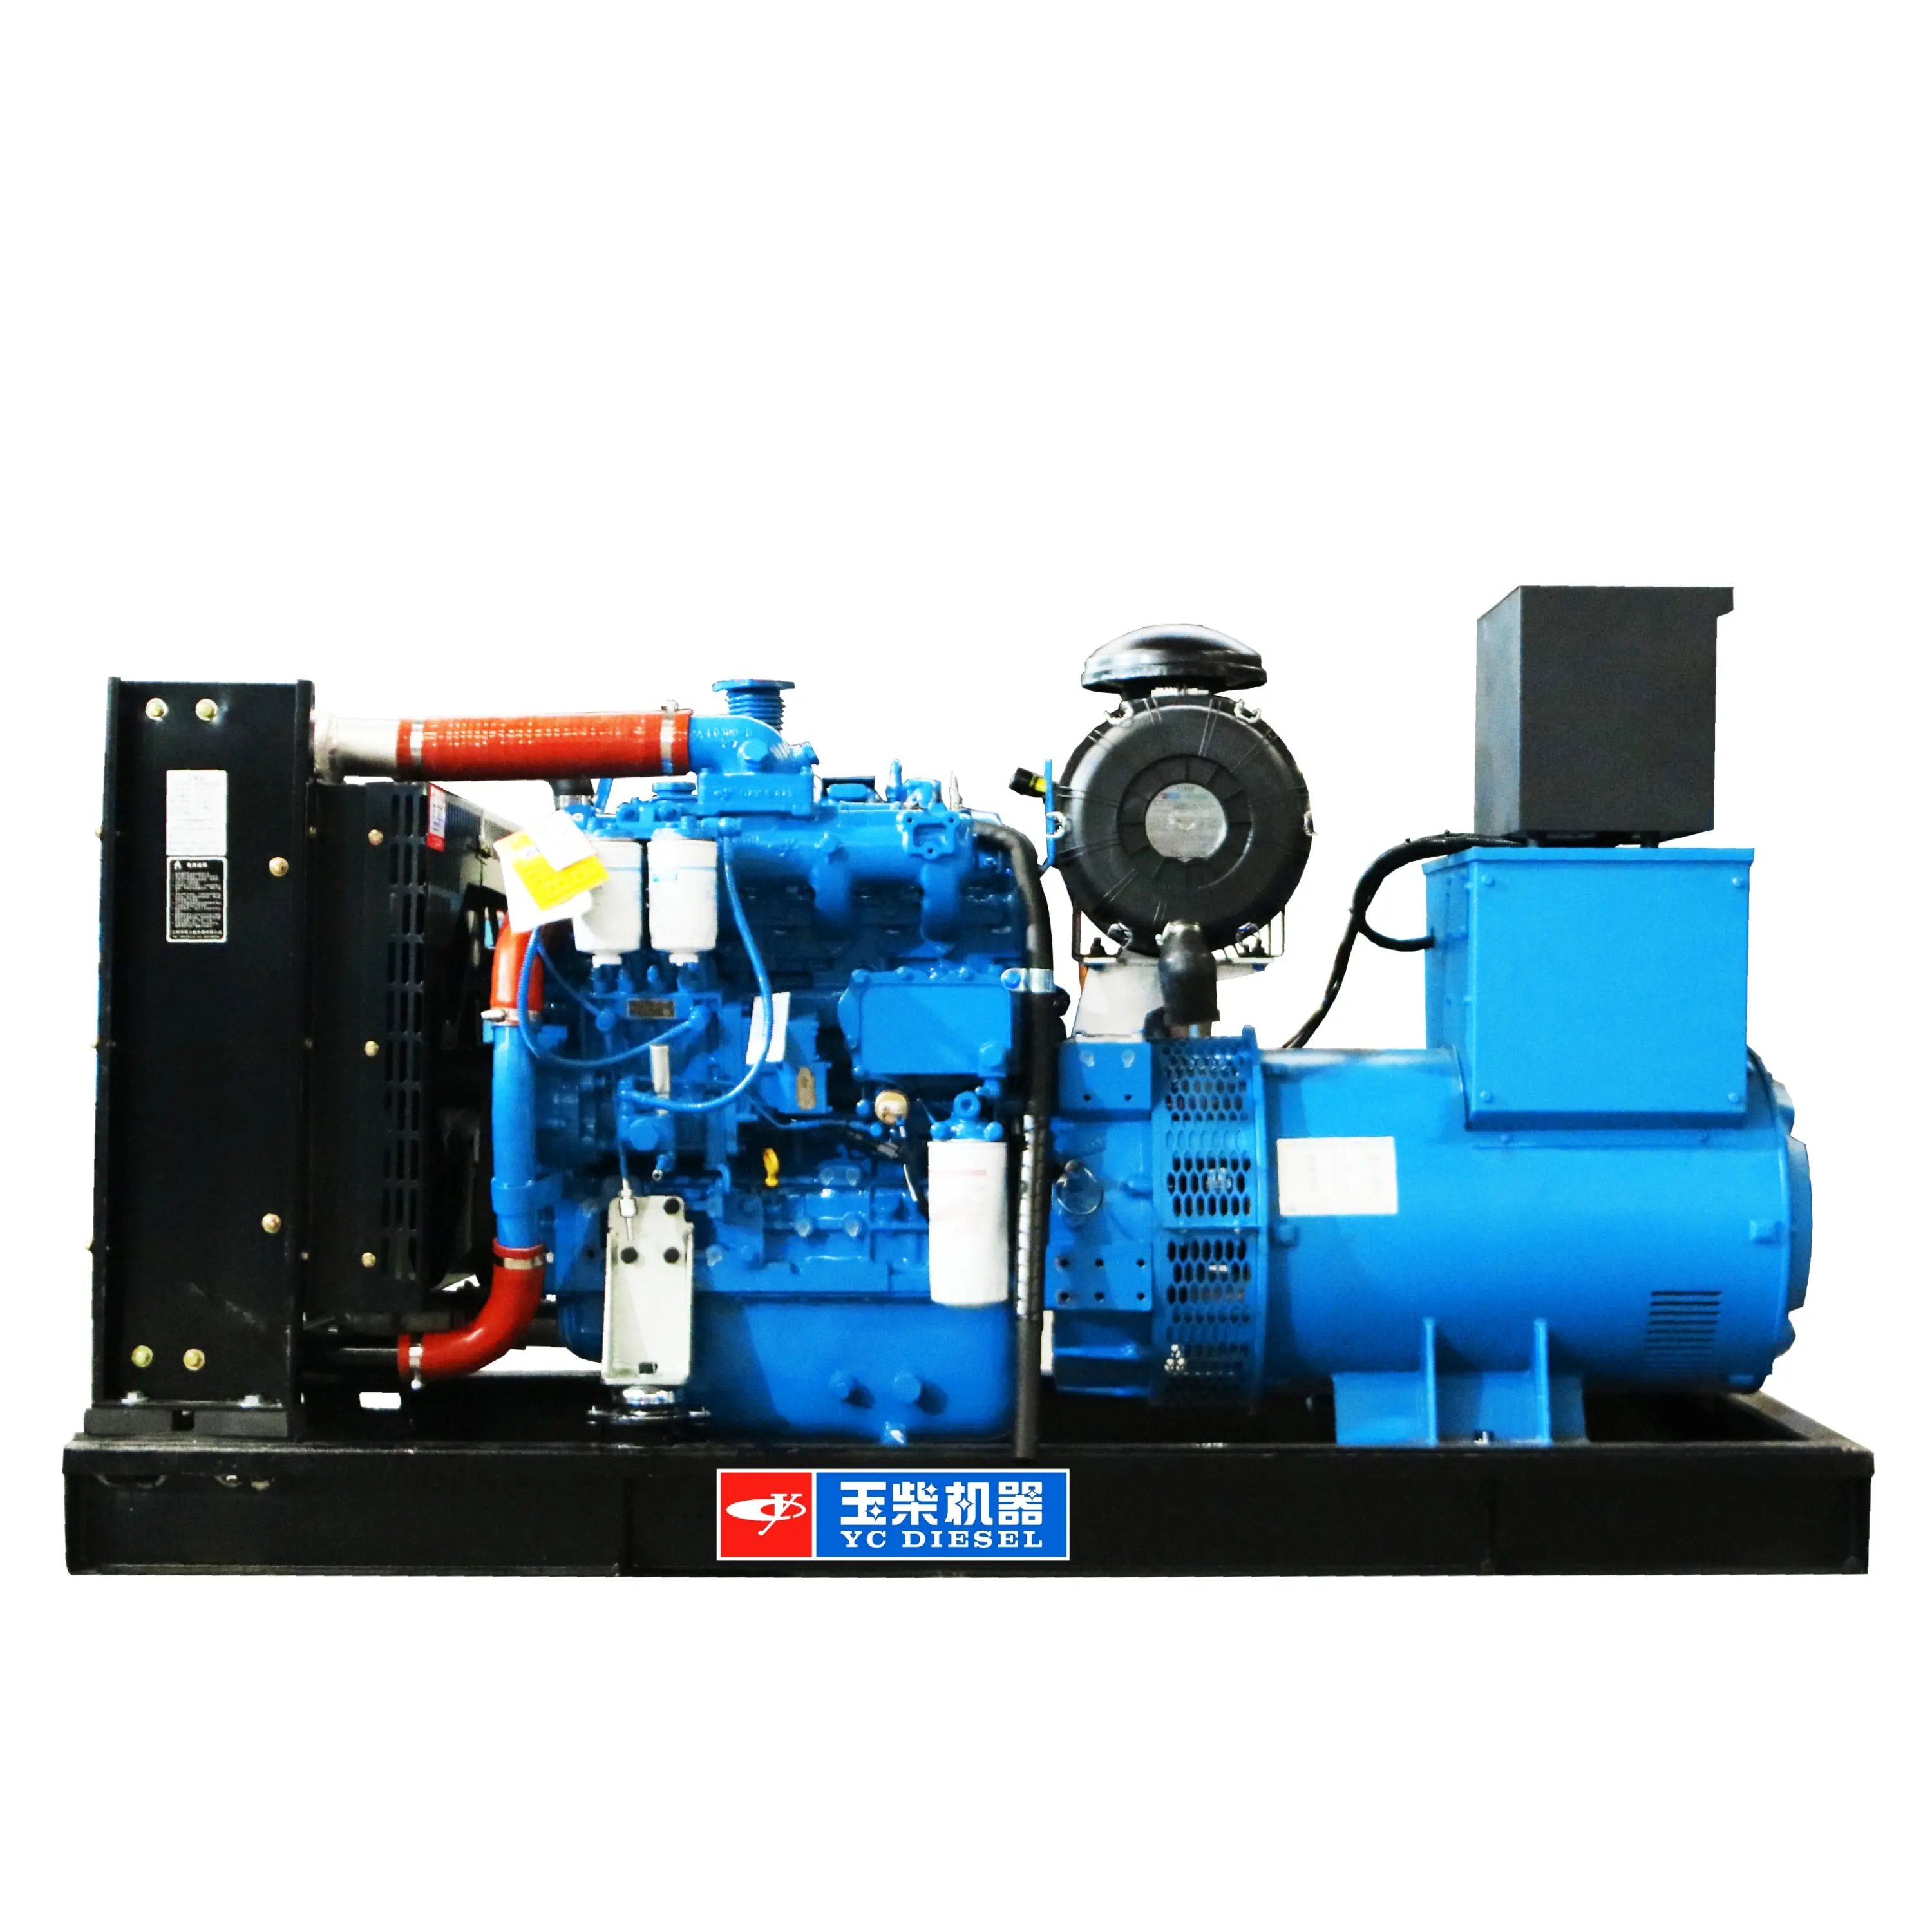 Best Selling YUCHAI YC6A165-D30 Diesel Engine Quality Air-Cooled Machinery Engines with Core Components Motor Pump Bearing Sale